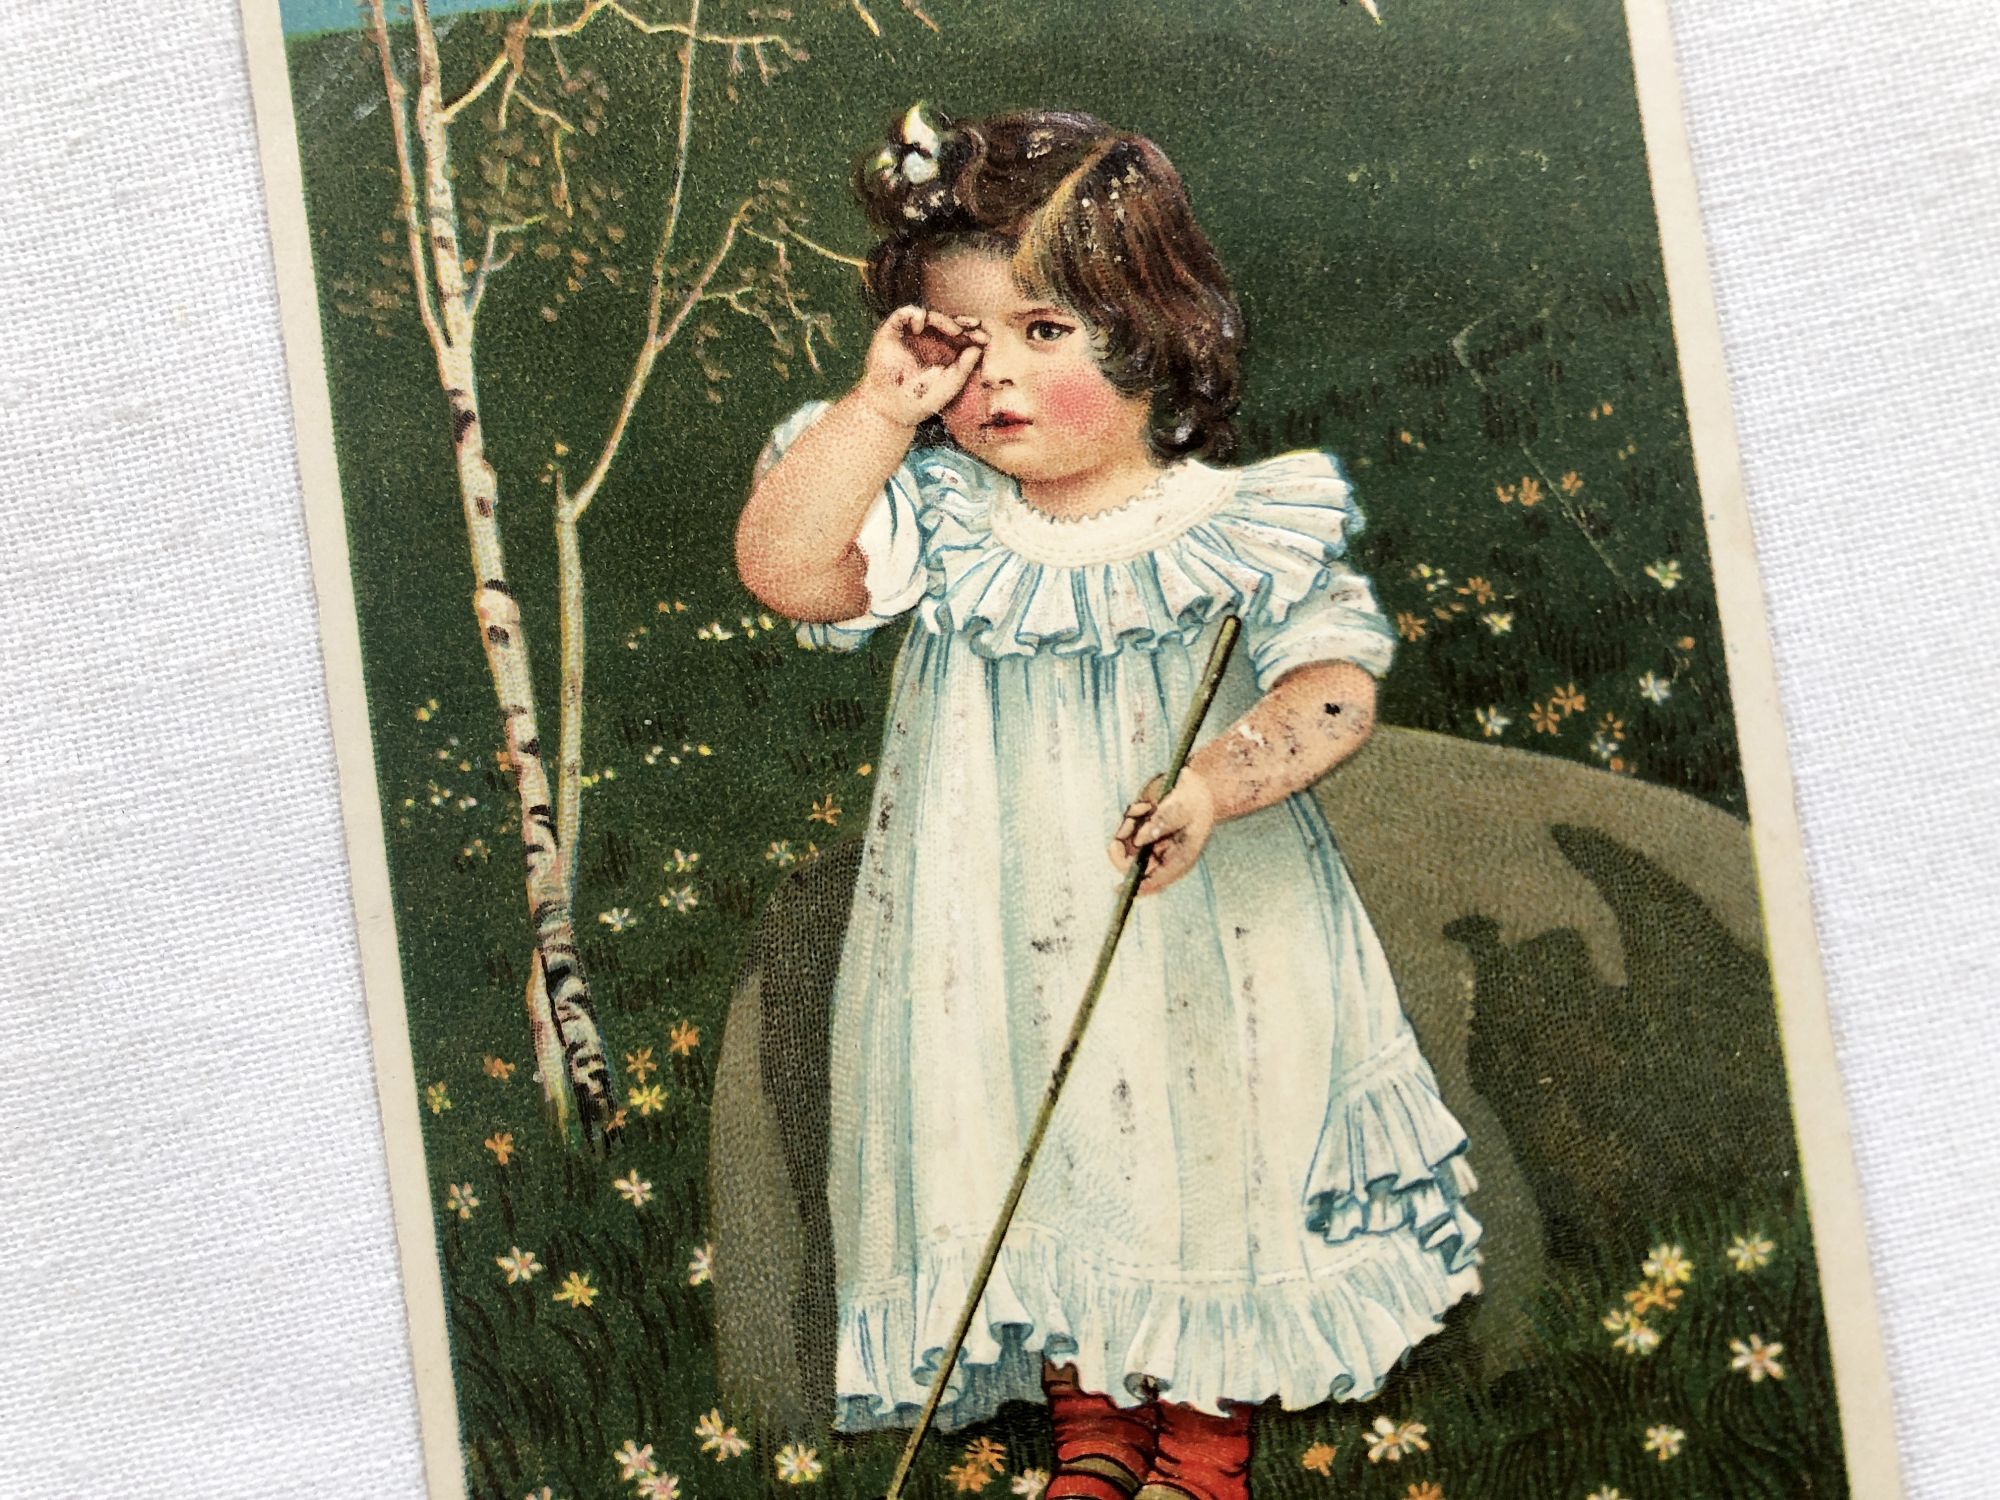 Embossed Belgian postcard depicting a little girl chasing butterflies from 1900s